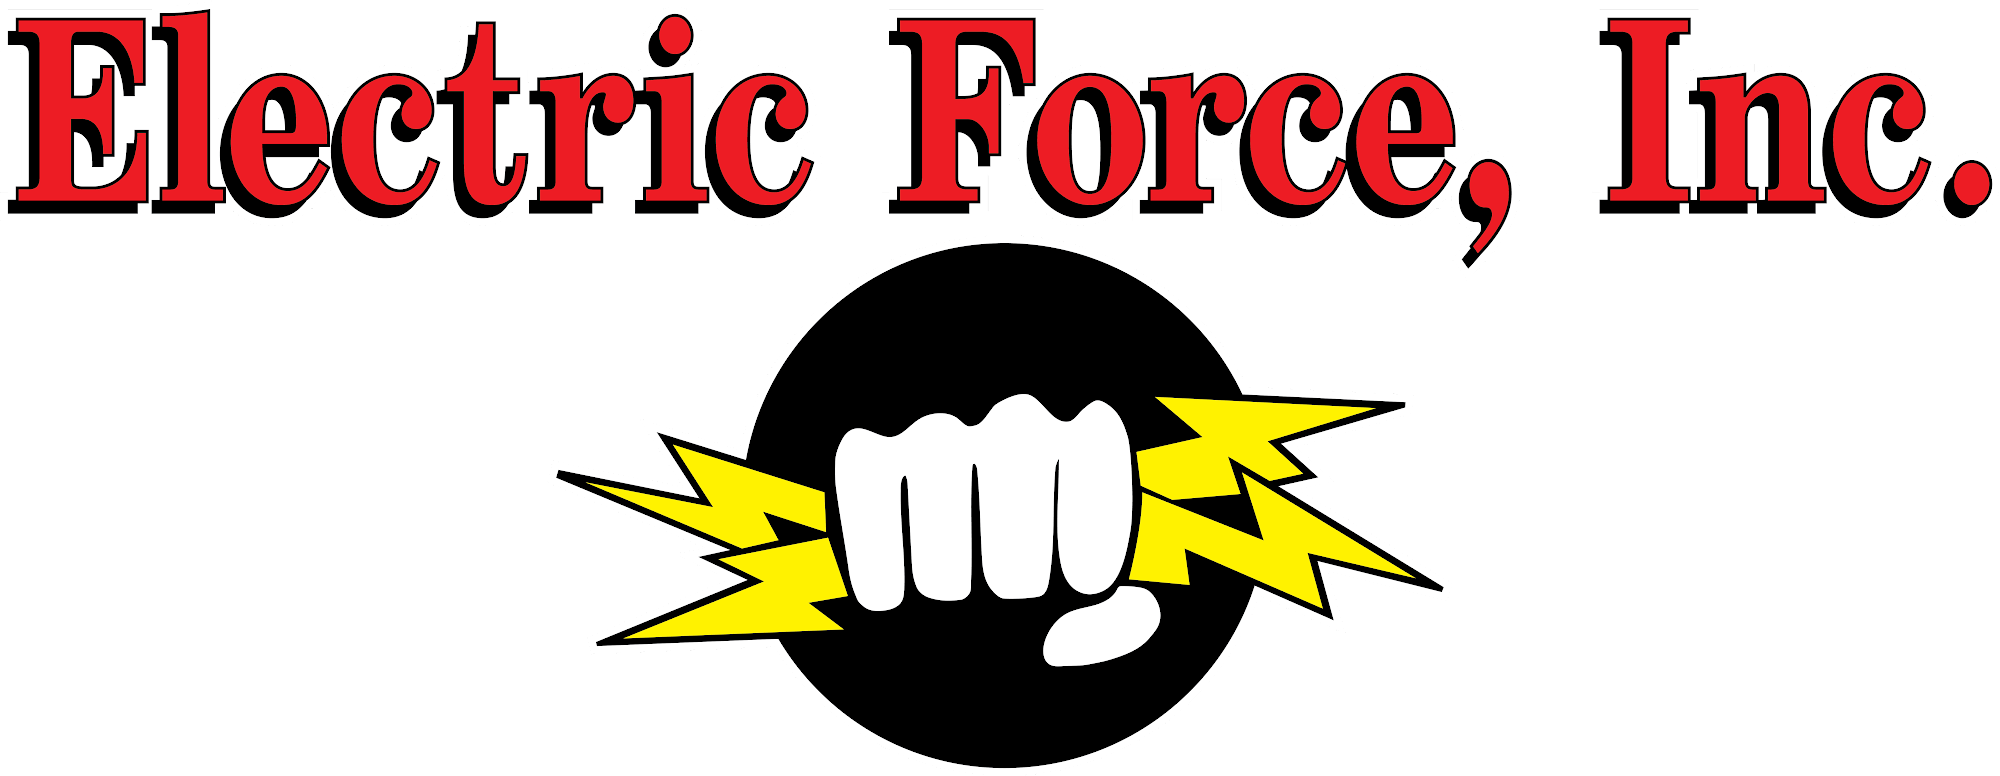 Electric Force, Inc Co Rd 41, Alcalde New Mexico 87511